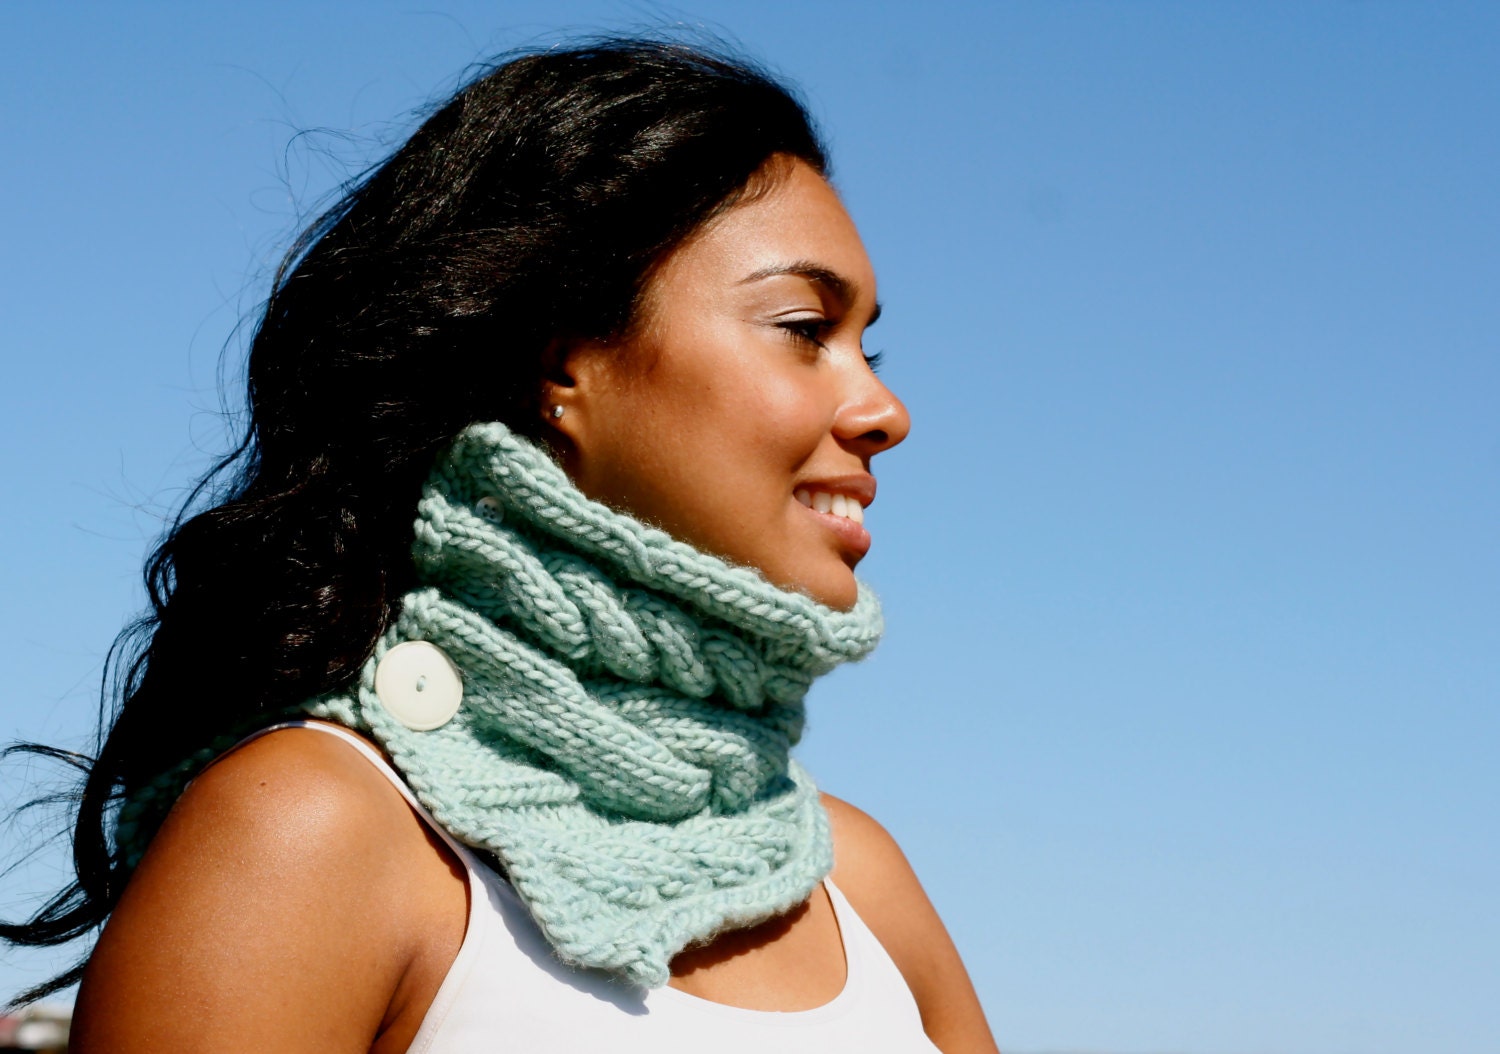 Made to Order: Robin's Egg Blue Hand Knitted Women's Cabled Neck Warmer Cowl Infinity Scarf in Wool Blend Roving with Buttons